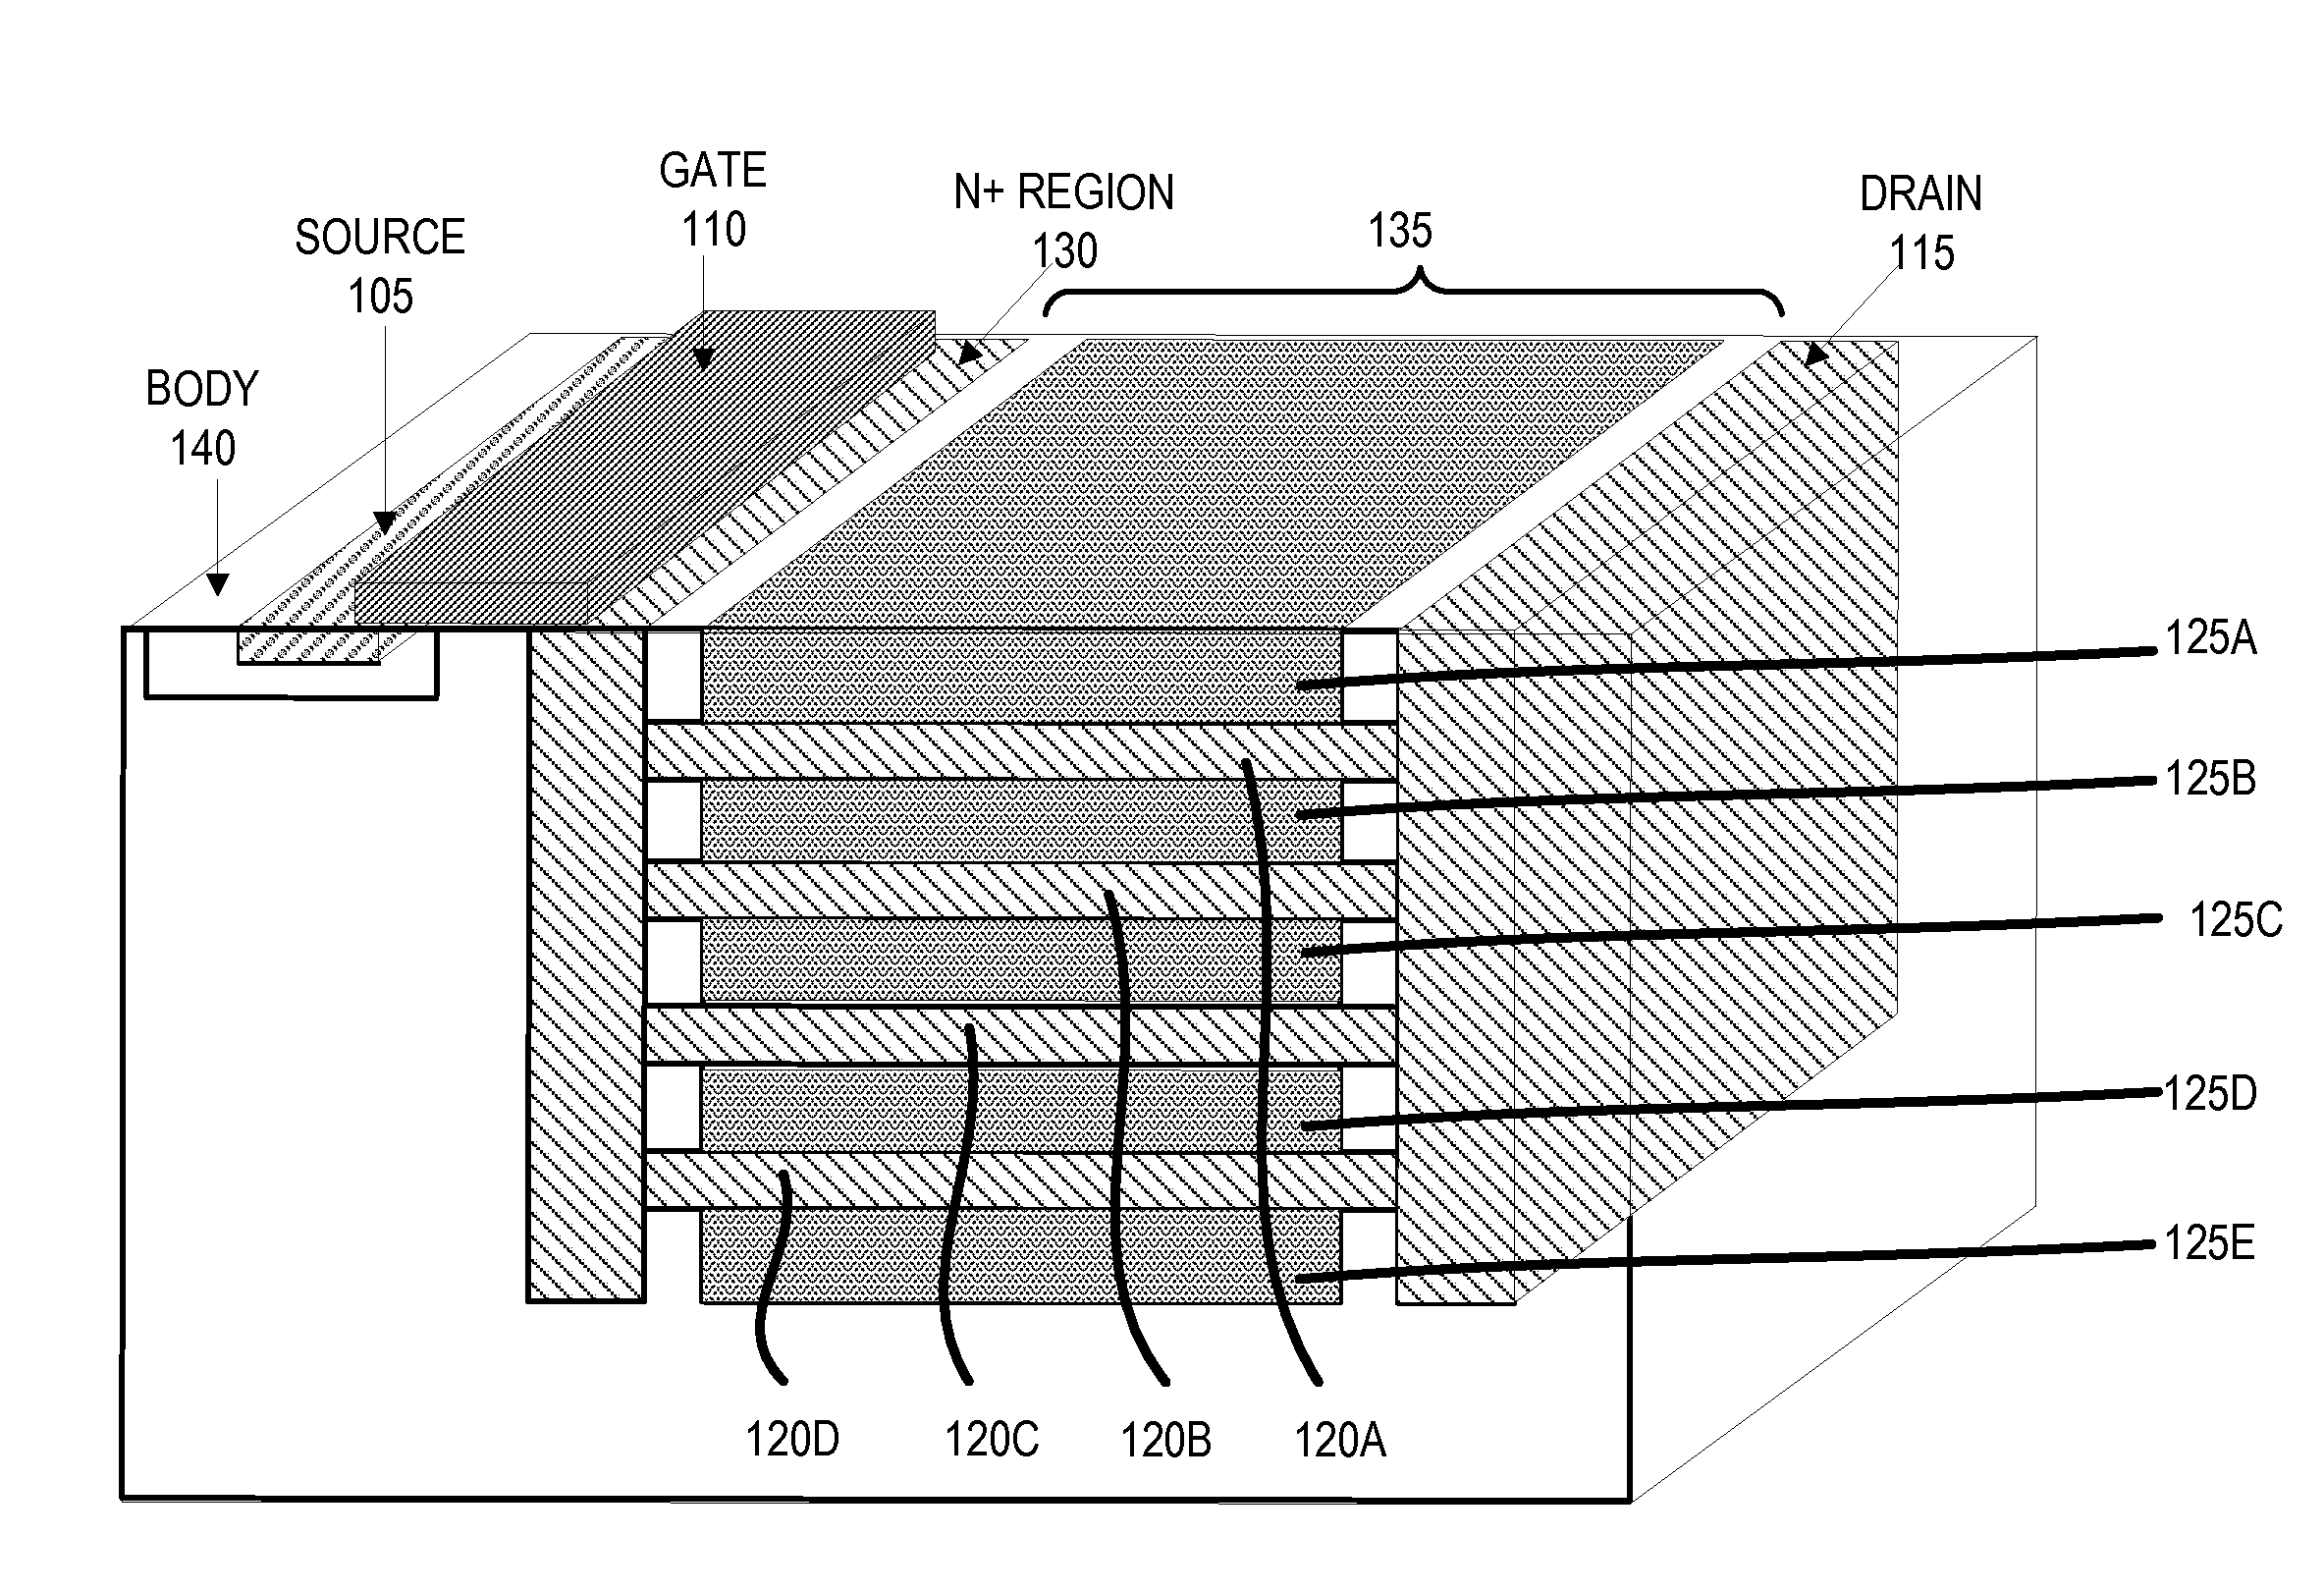 Multi-level Lateral Floating Coupled Capacitor Transistor Structures